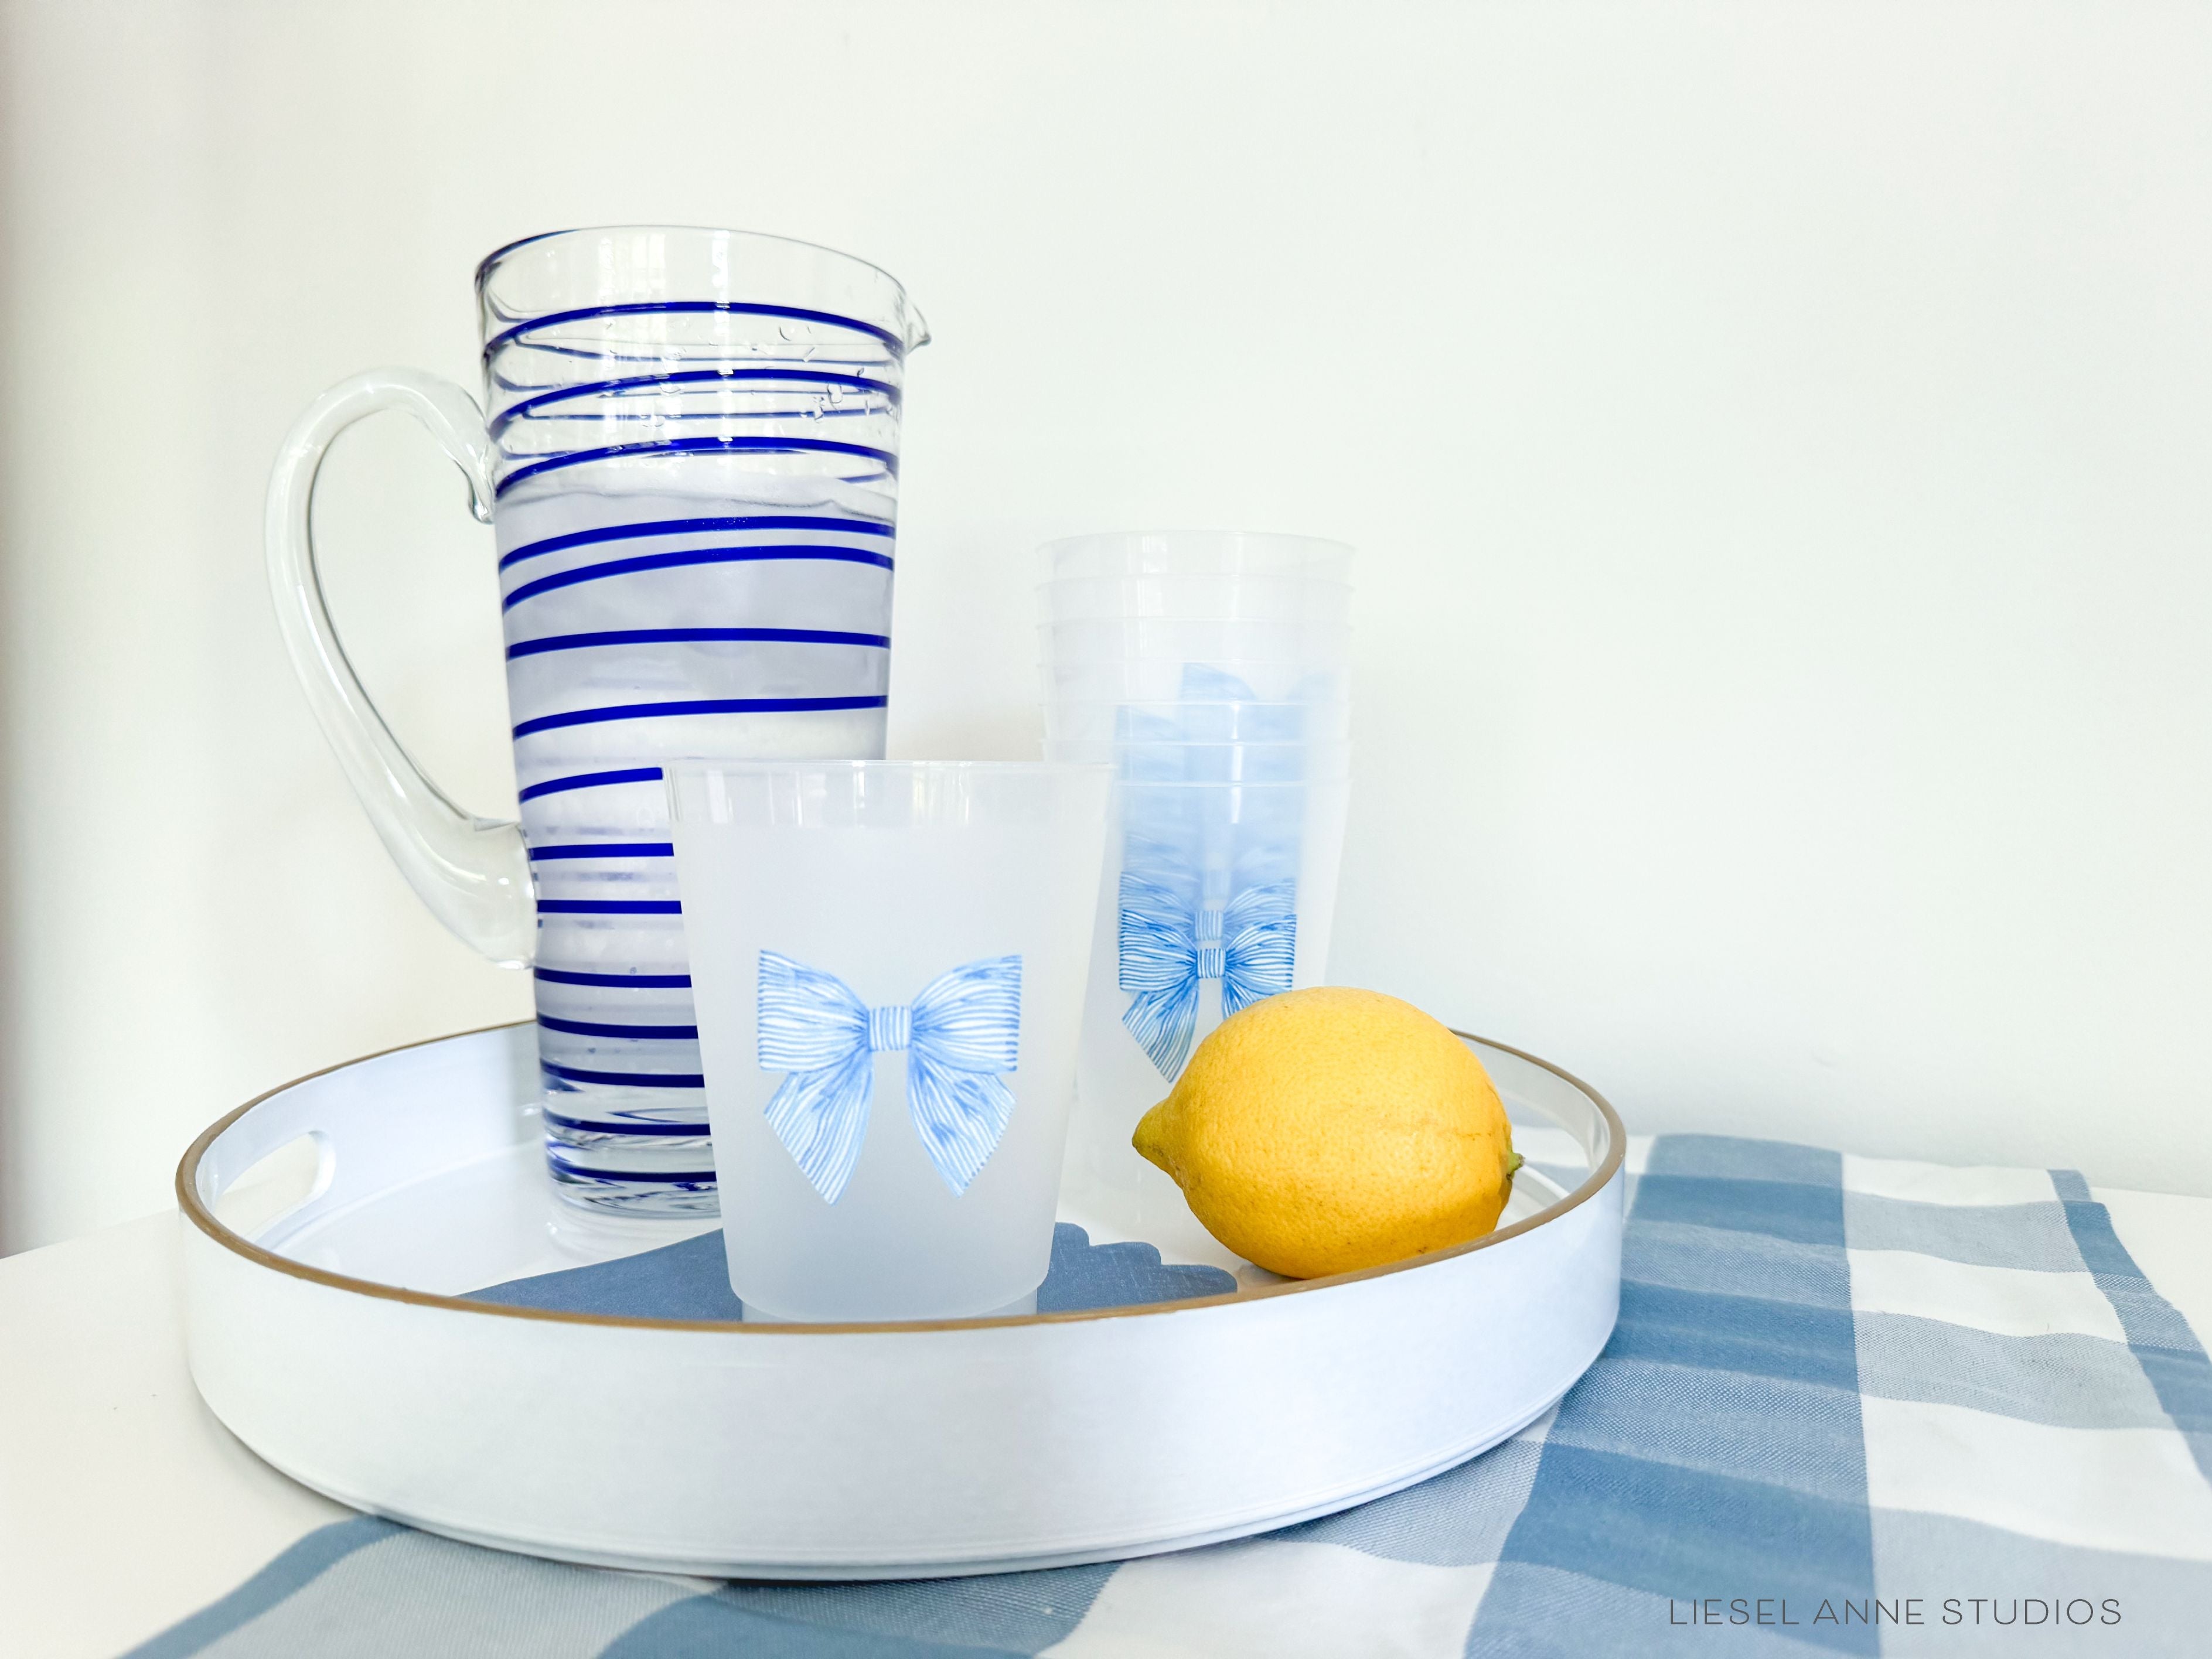 Stiped Blue Bow 16oz Shatterproof Cups [Set of 8]-These shatterproof cups feature our hand-painted striped blue bow and make great party decorations for baby showers, bridal showers, birthdays and more! They come in sets of 8 and are re-usable for other parties to come or make wonderful party favors!-The Singing Little Bird